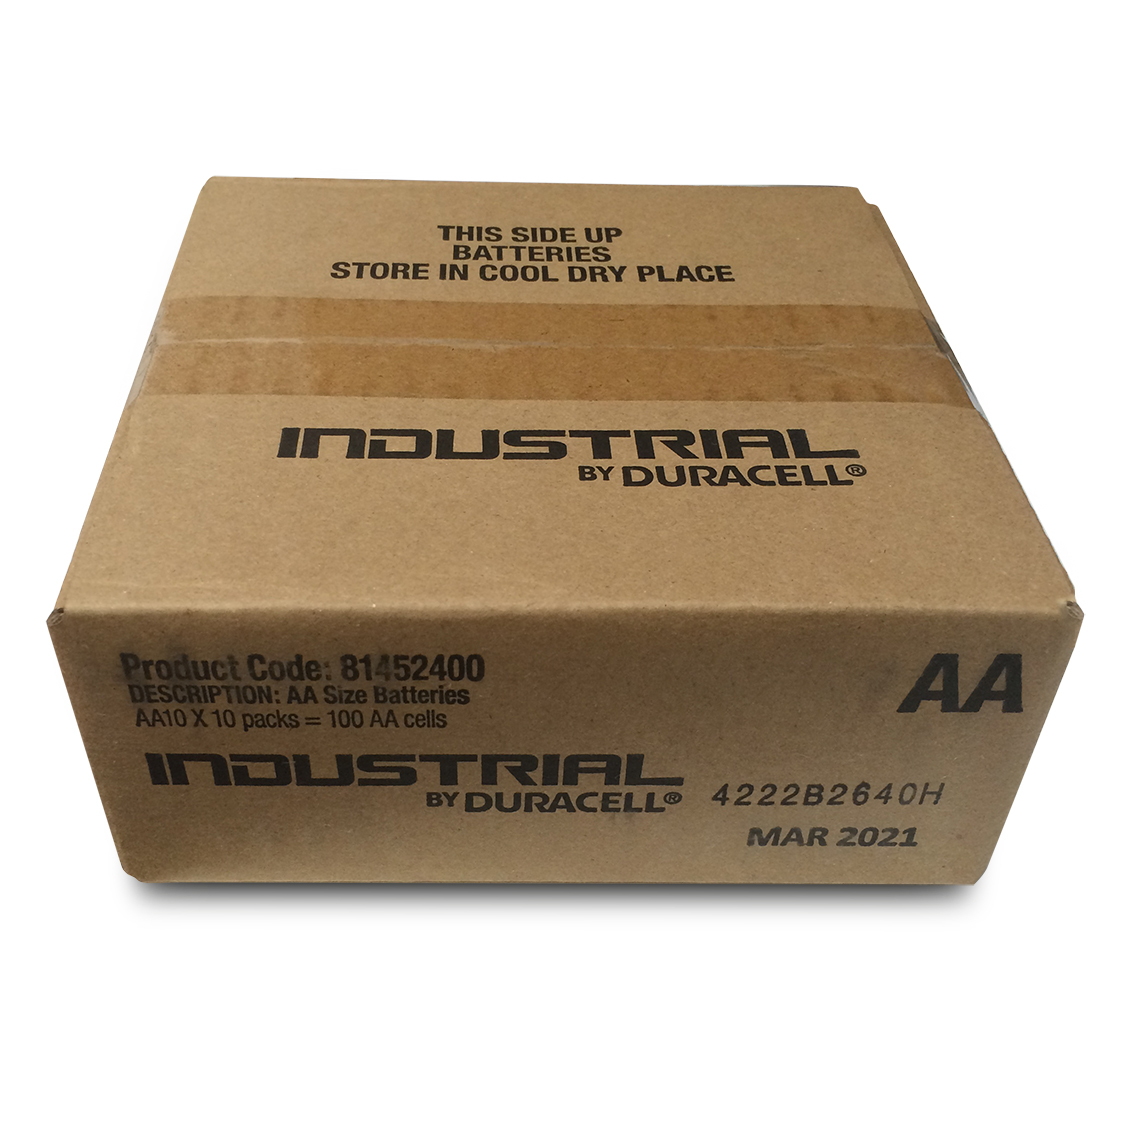 Duracell Industrial AA LR6 MN1500 Alkaline Batteries - Extra Value Box of 100